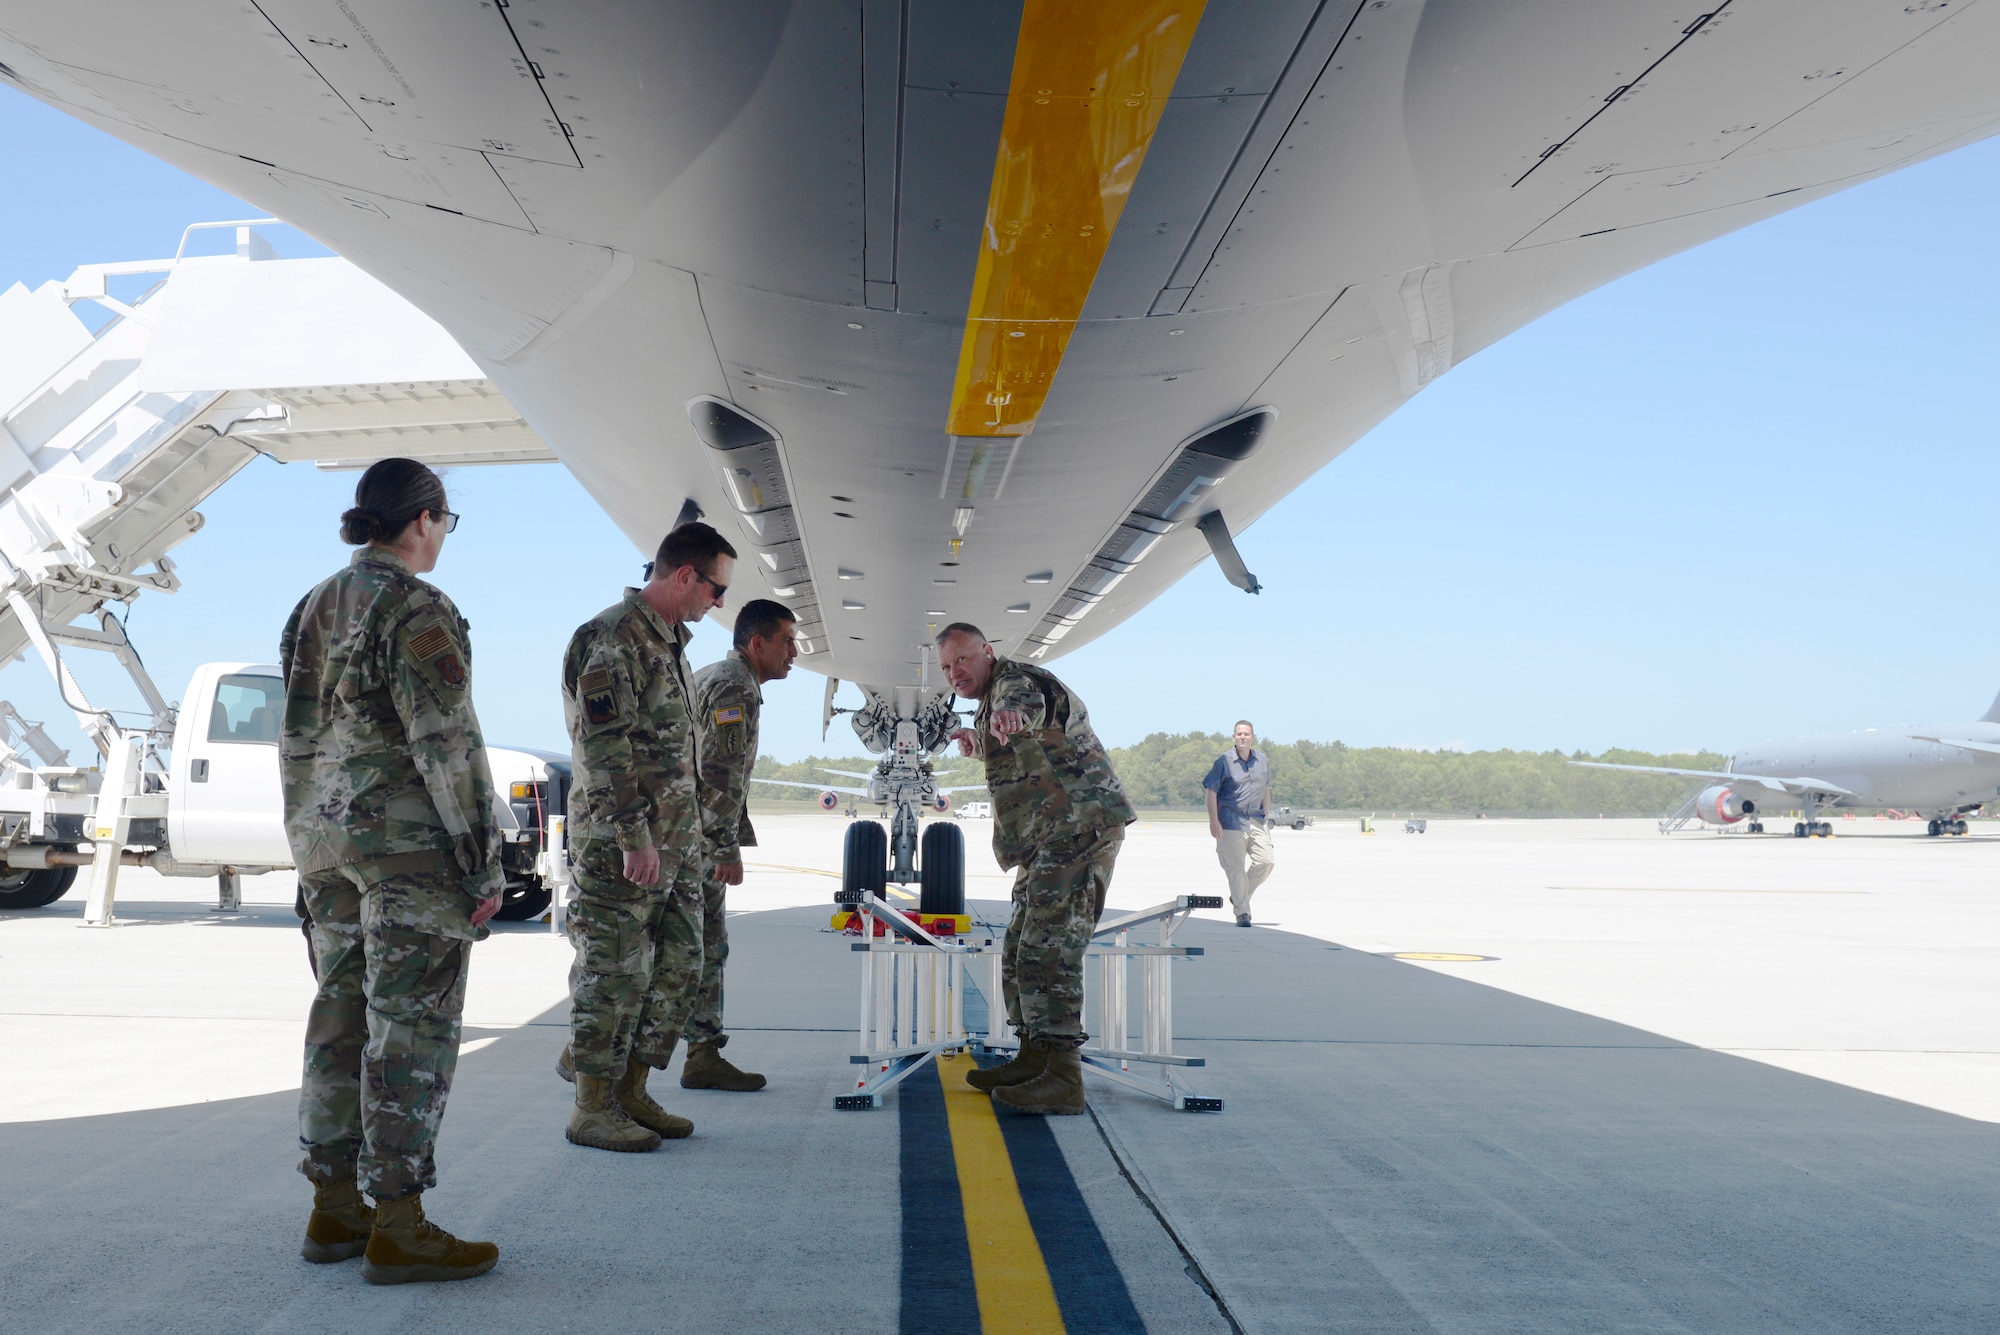 Col. John Pogorek, 157th Air Refueling Wing Commander, answers questions from Gen. Joseph L. Lengyel, the Chief of the National Guard Bureau, about the KC-46A Pegasus during the general's visit to Pease Air National Guard Base, Newington, N.H., May 27, 2020. Pictured from left to right are Chief Master Sgt. Erica Rhea, 157th ARW Command Chief, Gen. Lengyel, Maj. Gen. David Mikolaities, New Hampshire National Guard Adjutant General, and Col. Pogorek. (U.S. Air National Guard photo by Senior Master Sgt. Timm Huffman)